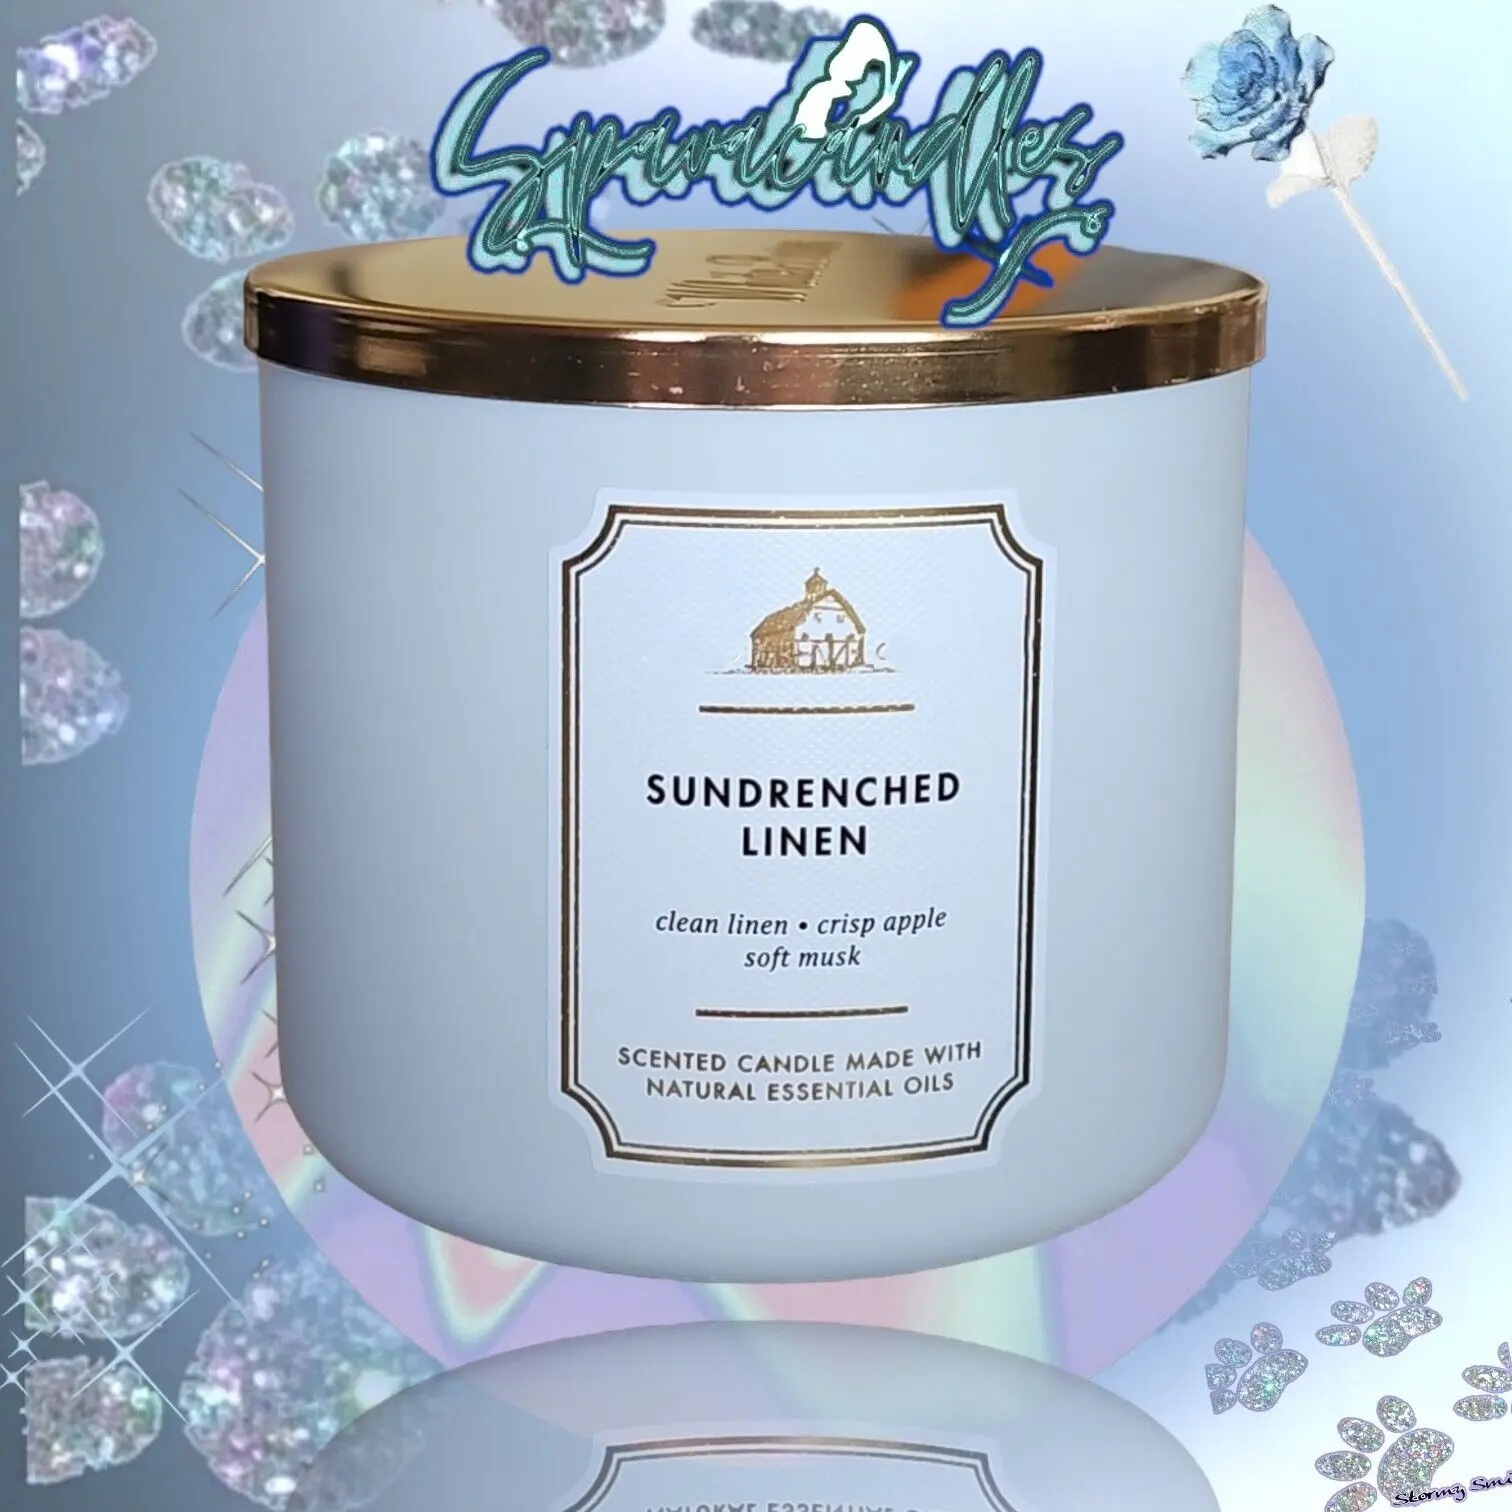 SUN-DRENCHED LINEN 3-Wick Candle 14.5 oz US Seller